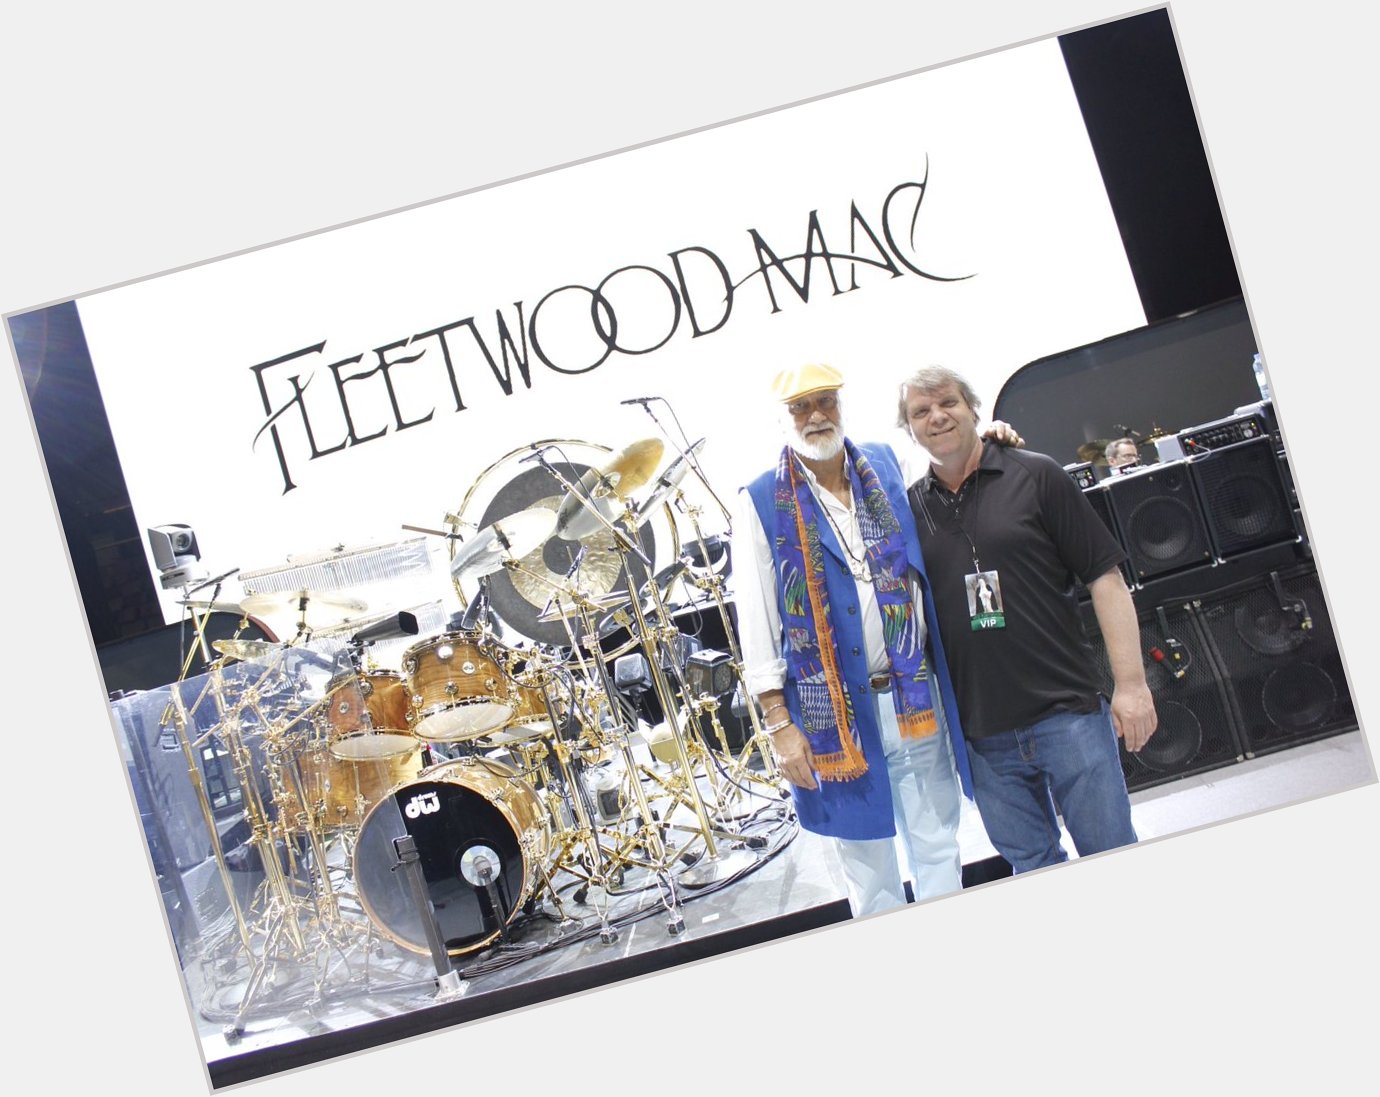 Happy 74th Birthday to Fleetwood Mac drummer Mick Fleetwood, born this day in Redruth, United Kingdom 